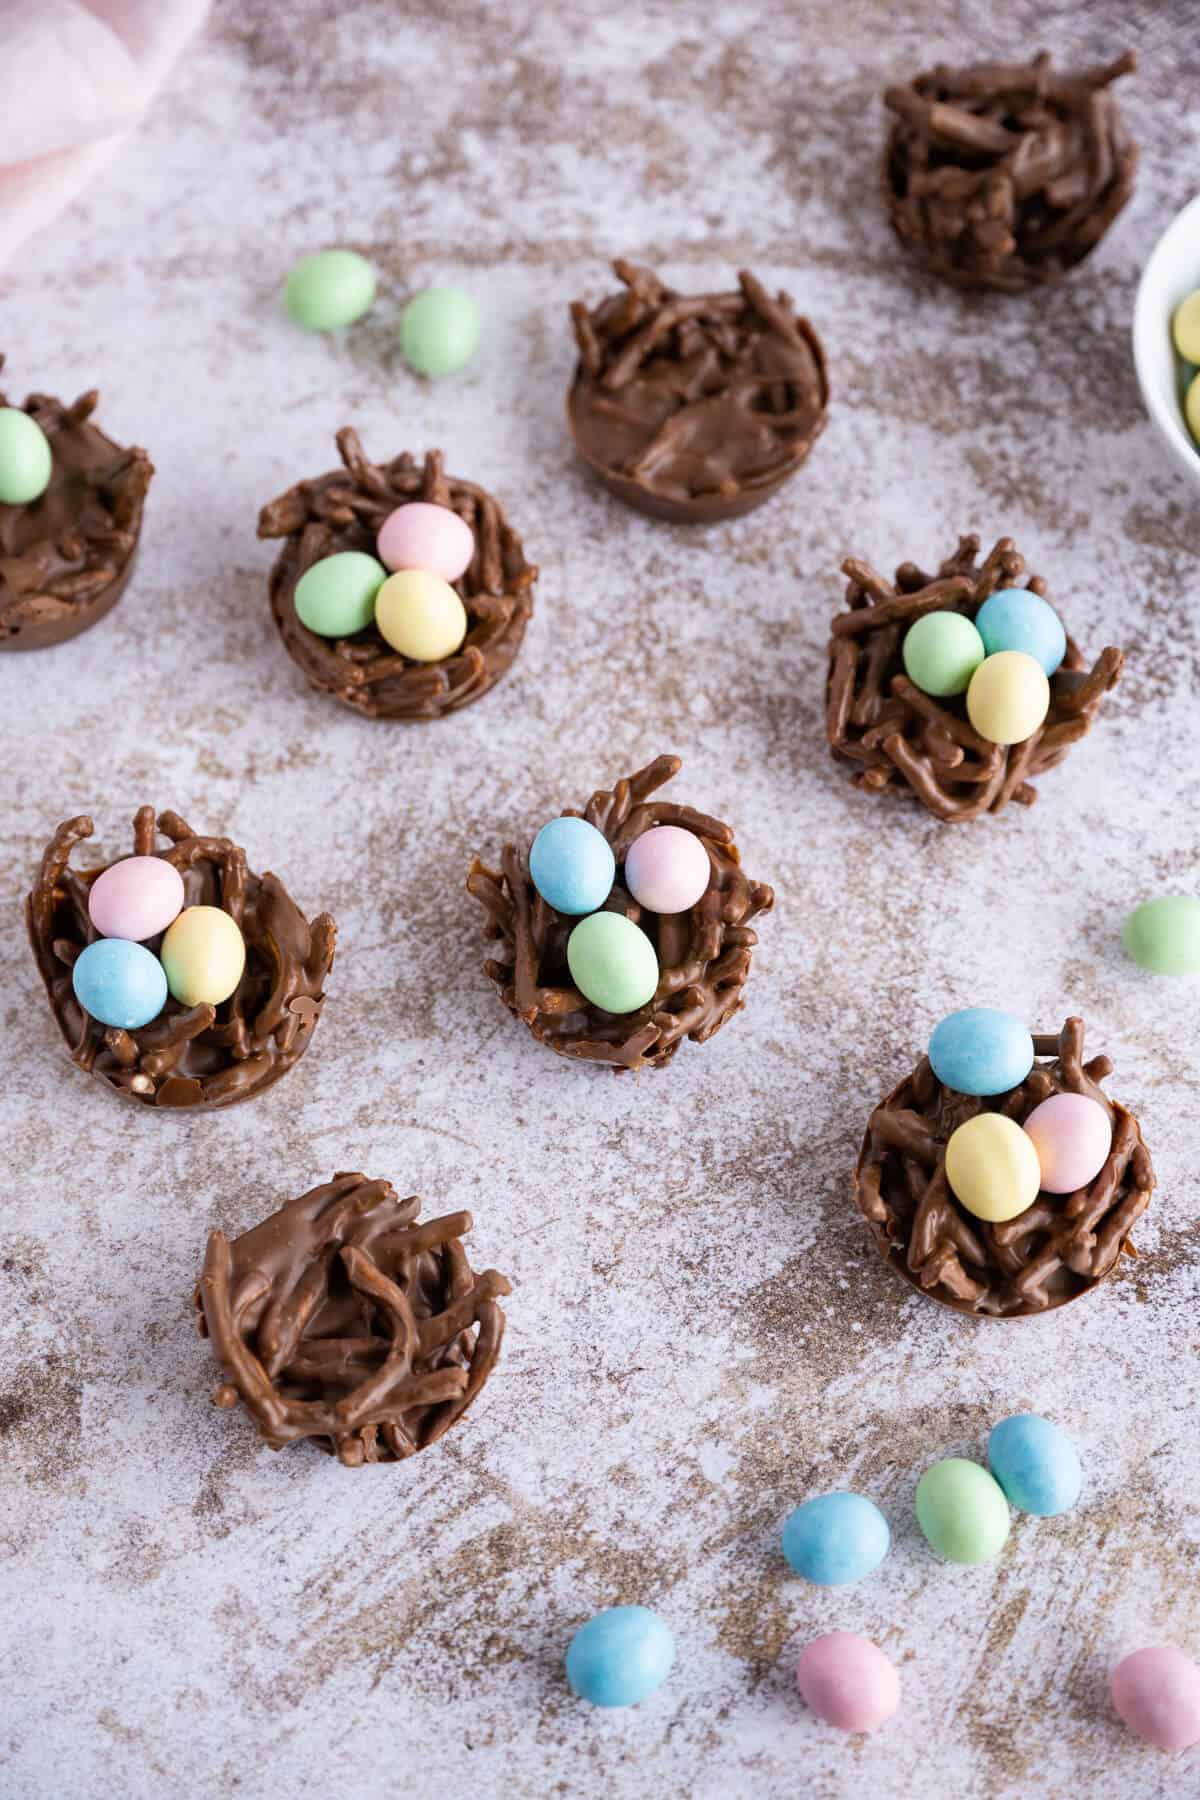 Several Chocolate Birds Nest Cookies, some filled with candy eggs, some empty. Mini candy eggs scattered alongside them.